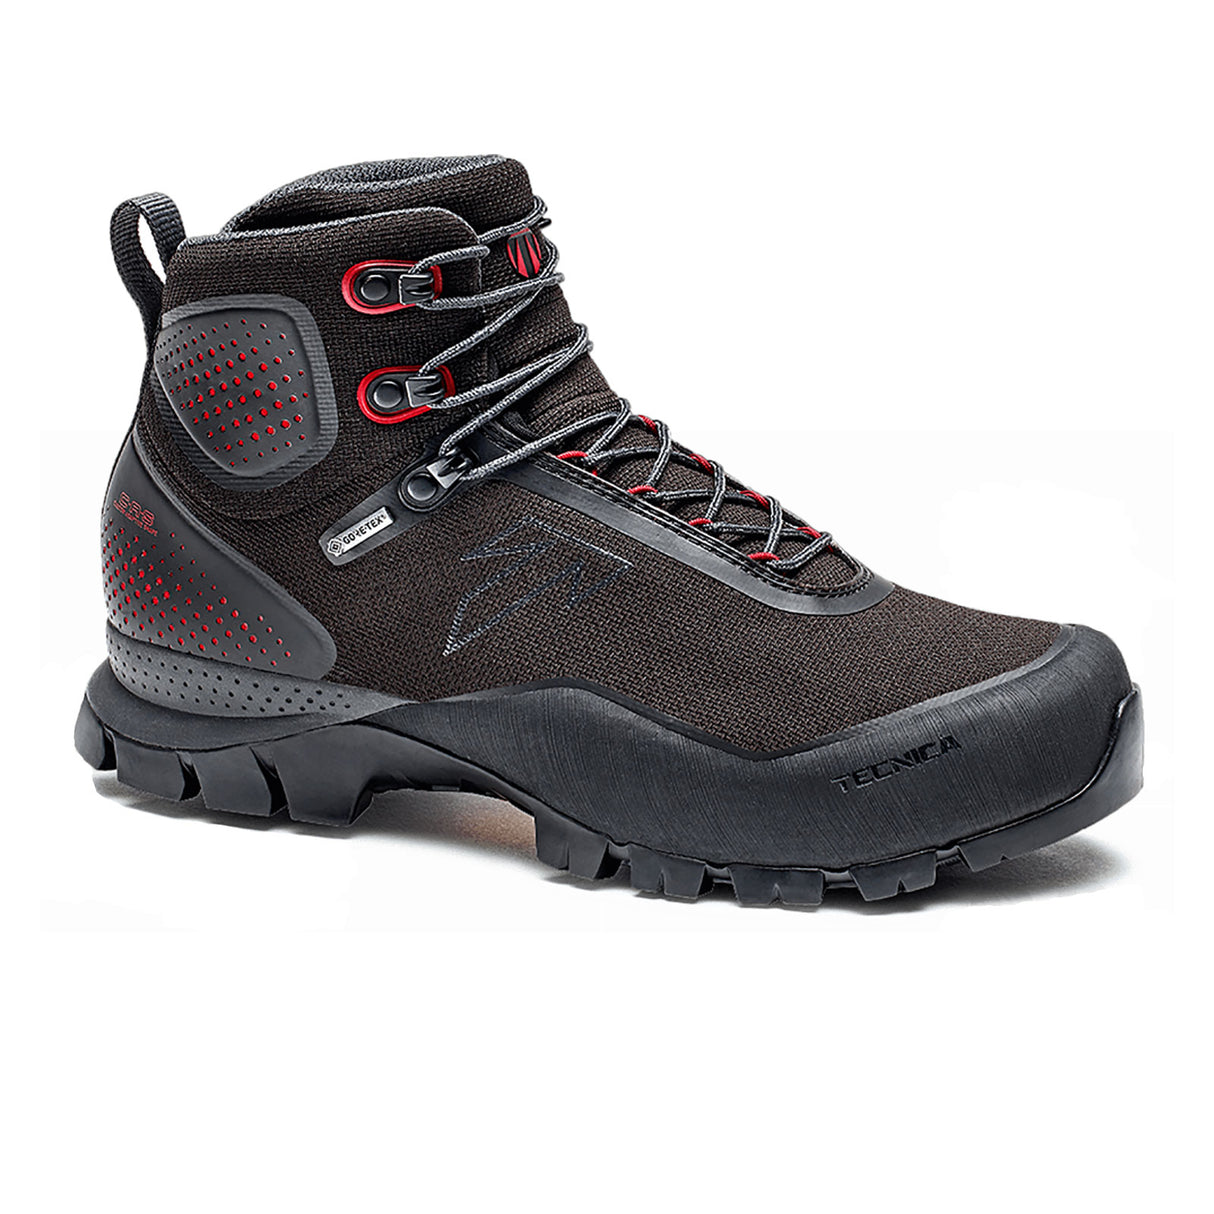 Tecnica Forge S GTX (Women) - Black/Jester Red Boots - Hiking - Mid - The Heel Shoe Fitters